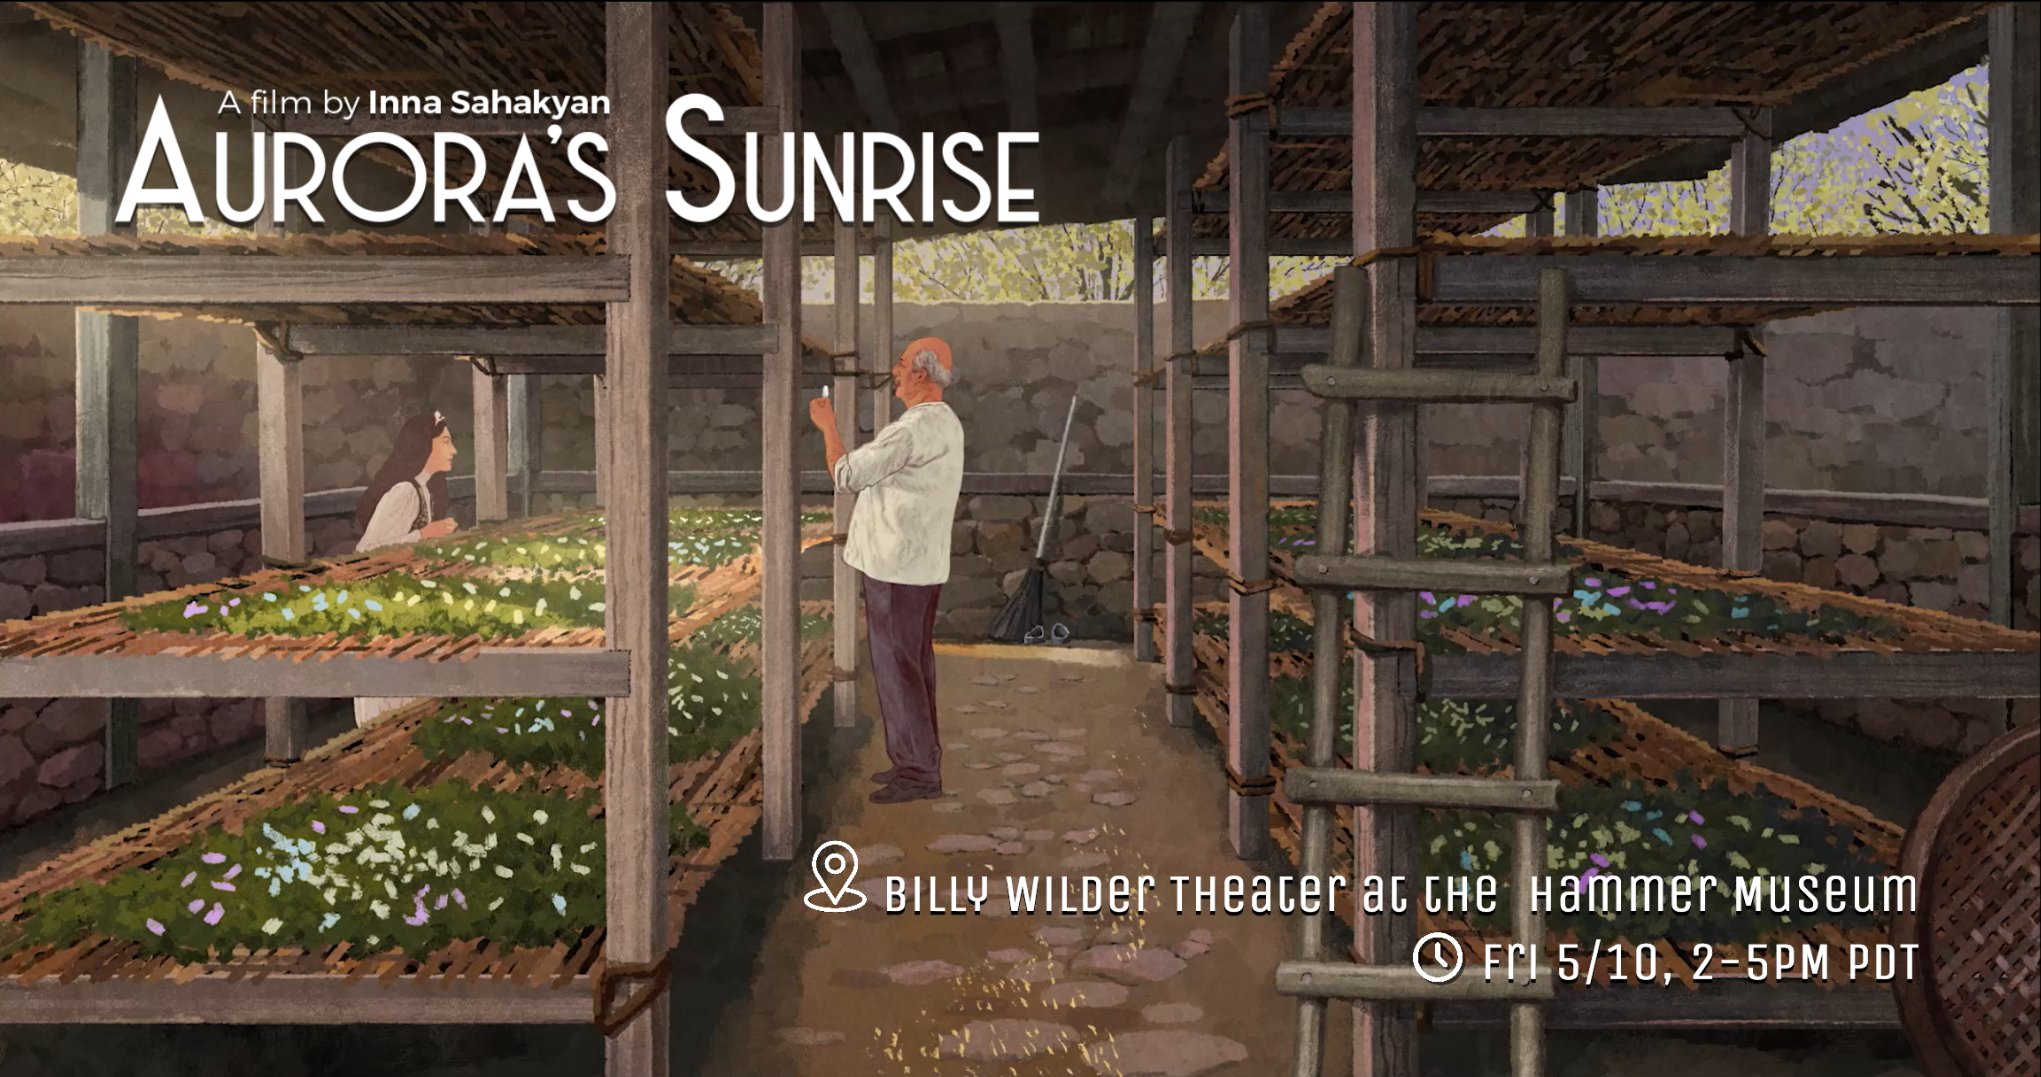 Join us for a special screening of Aurora&rsquo;s Sunrise as a part of special series of @auroraprize &amp; @promiseinstucla events in Los Angeles, CA!

Post-screening there will be an enriching discussion with insights from Dr. Eric Esrailian, the f